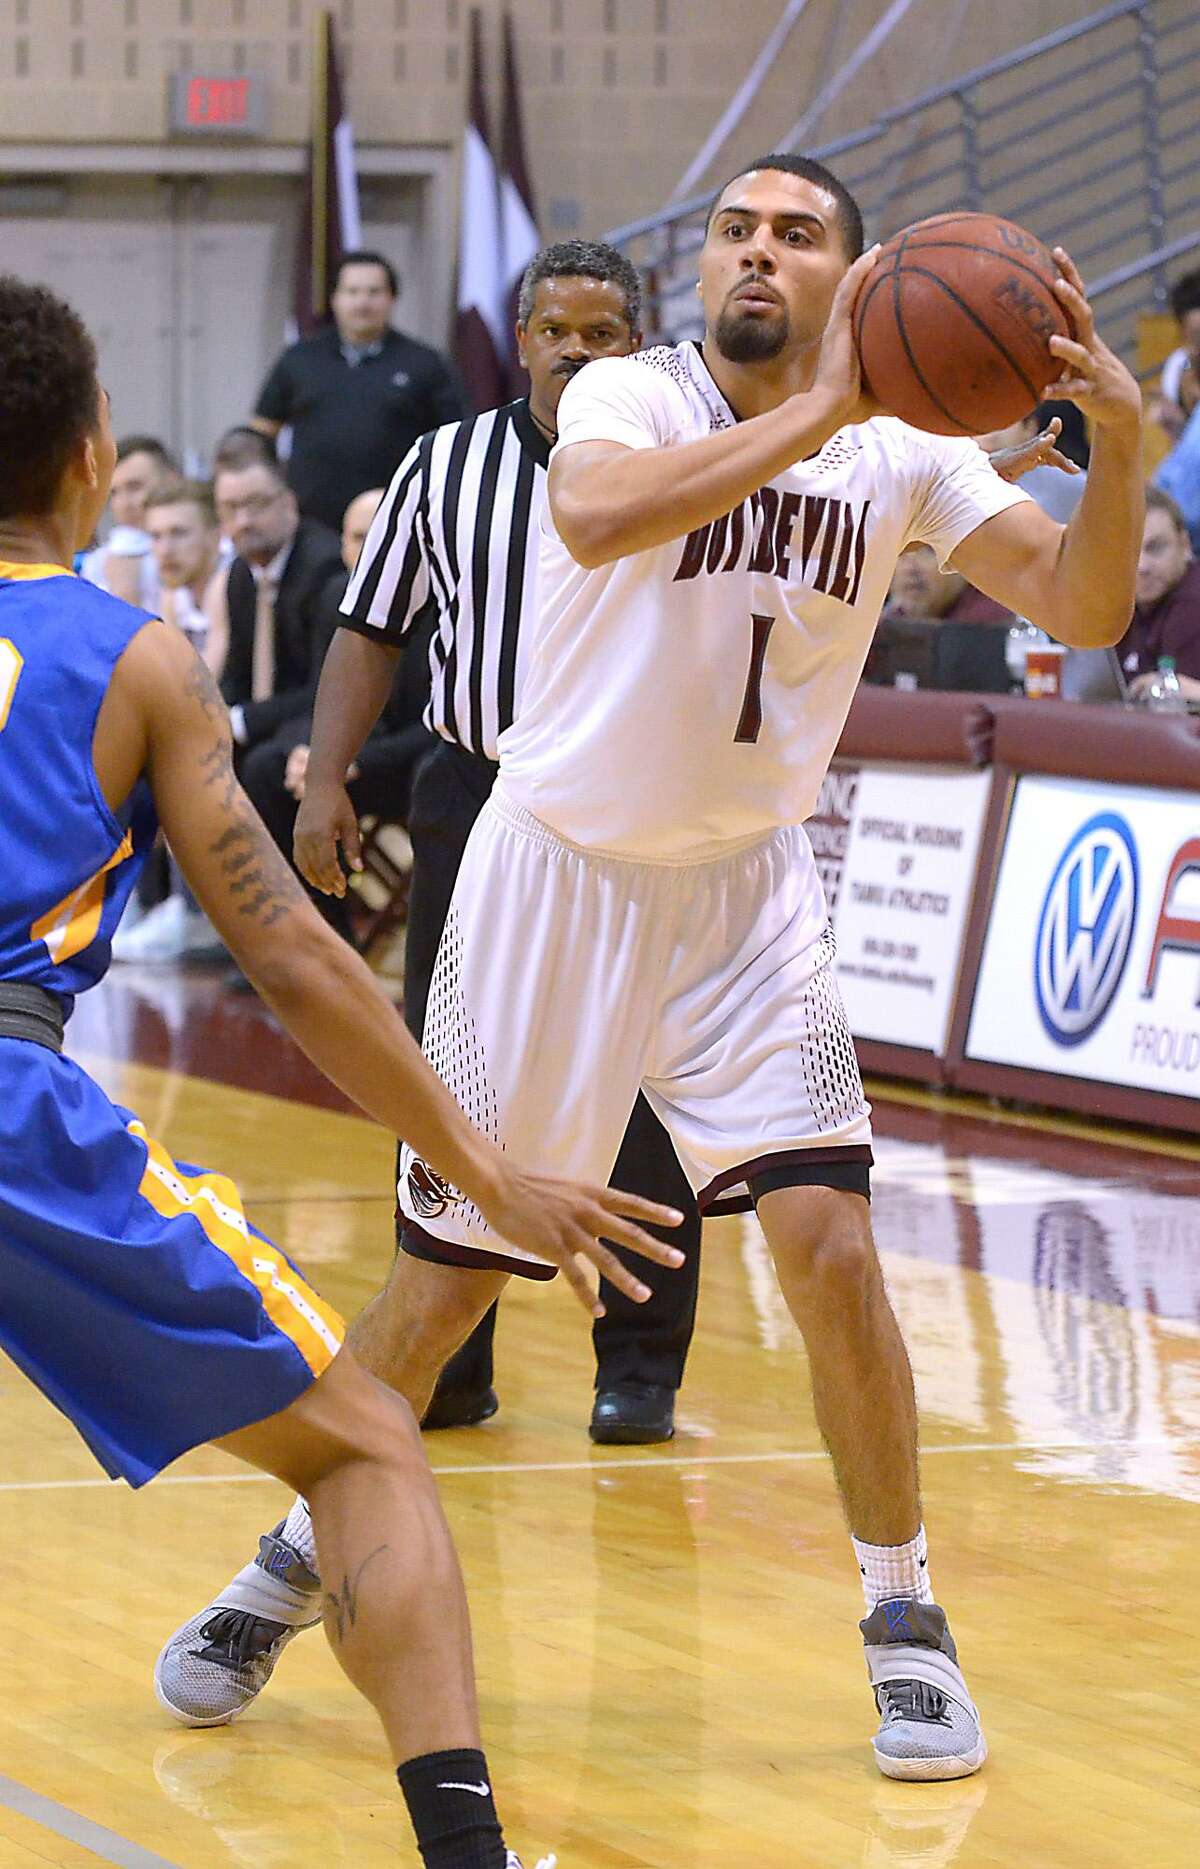 Arthur Santanna scored 16 points in TAMIU’s win during Saturday’s season finale at Newman. The Dustdevils claimed the No. 2 seed in the Heartland Conference tournament and square off in Tulsa next Thursday against seventh-seeded St. Mary’s at 7:30 p.m.